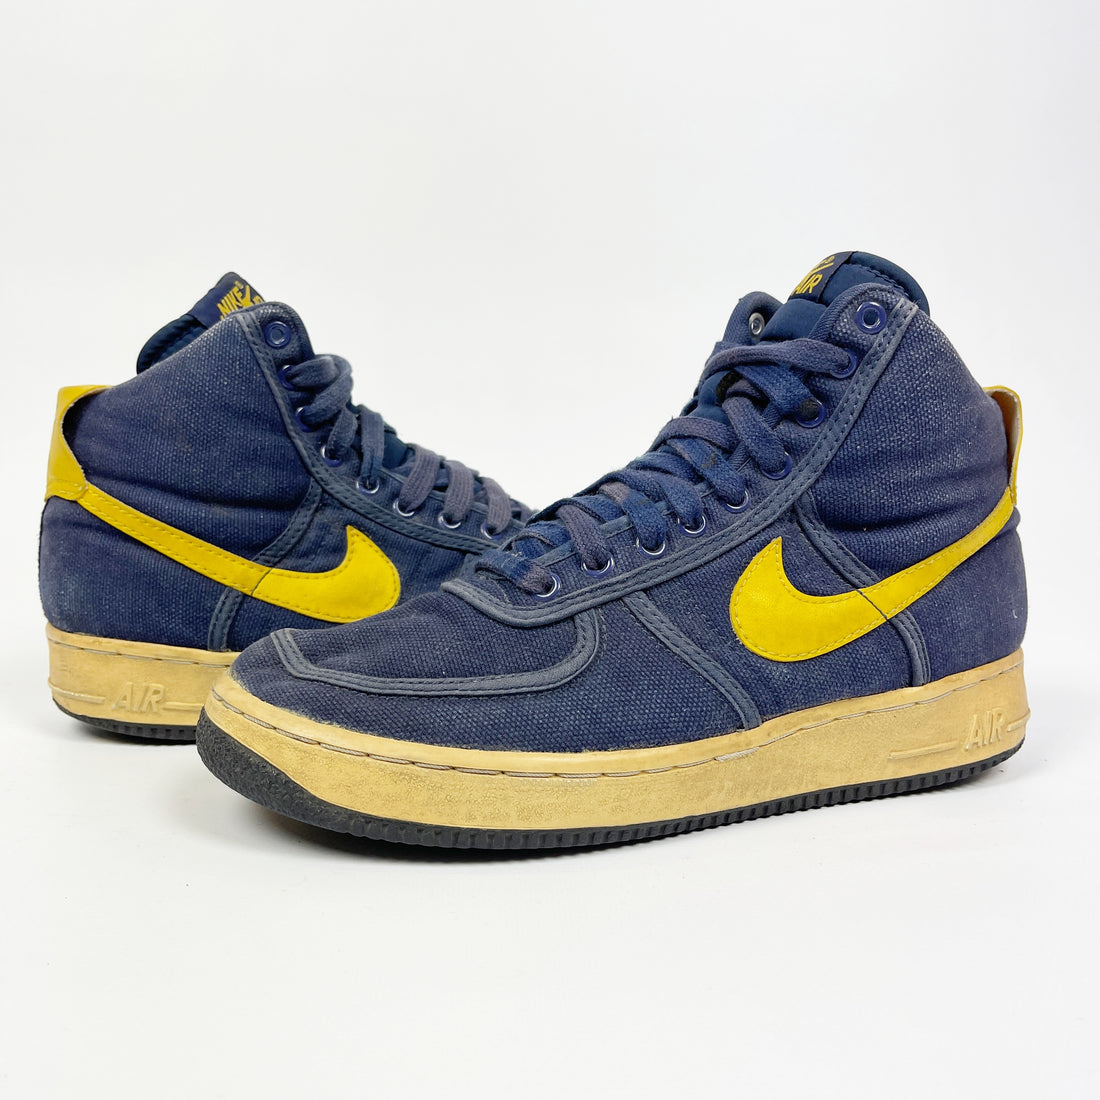 Air Force 1 Midnight 1990 ⭑ – Vintagetts